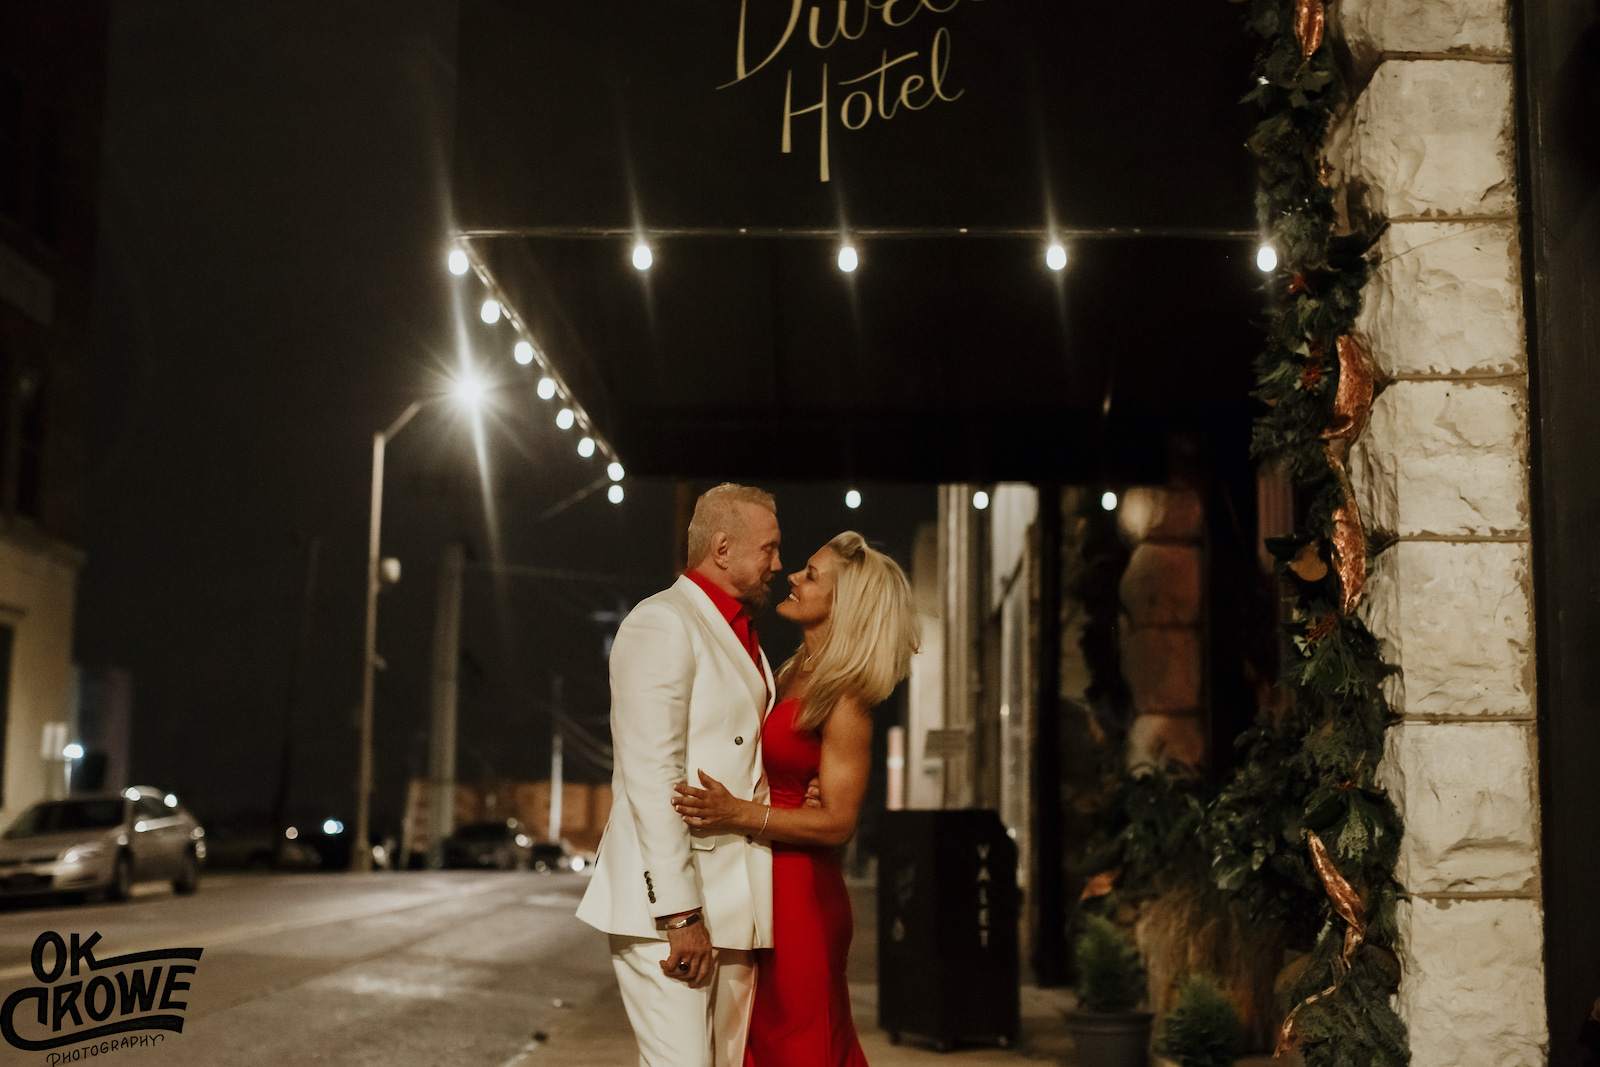 Diamond Dallas Page and Payge McMahon surprise wedding at The Dwell Hotel in downtown Chattanooga